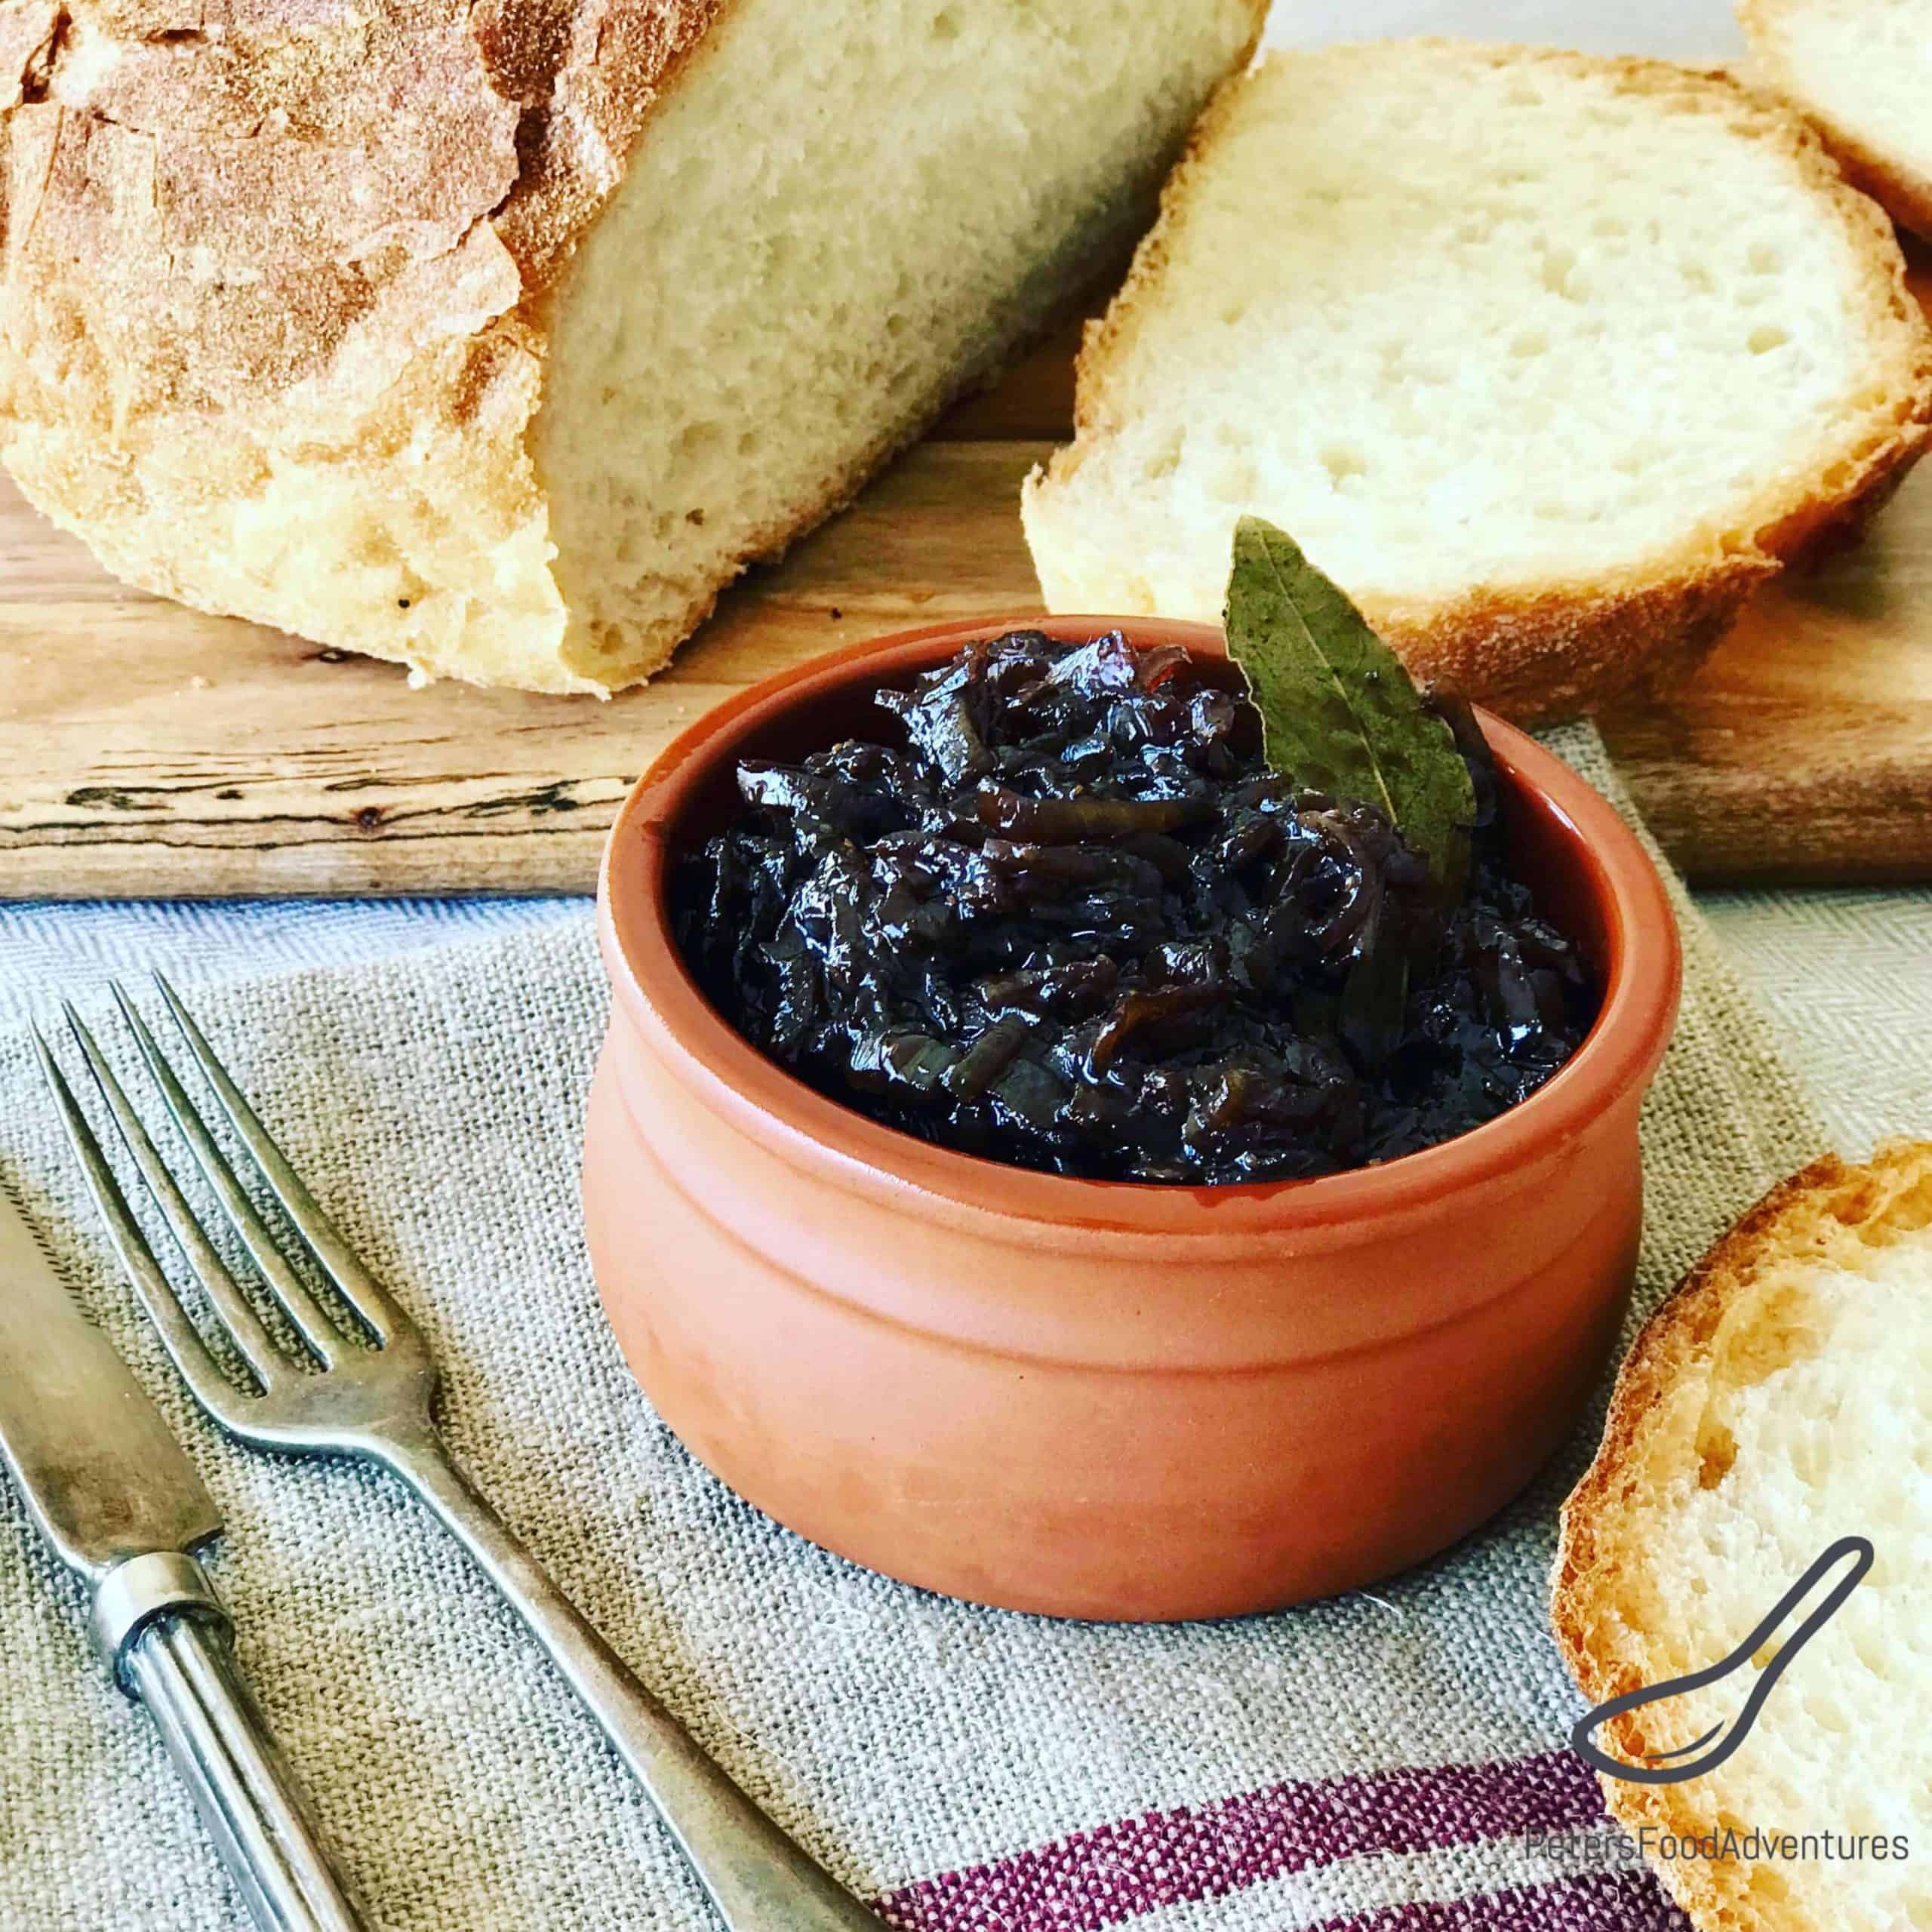 Caramelized Balsamic Onion Jam or Onion Relish, sweet and tangy. Perfect with grilled meats, sausages, hot dogs and hamburgers or generously slathered on a piece of crusty bread.